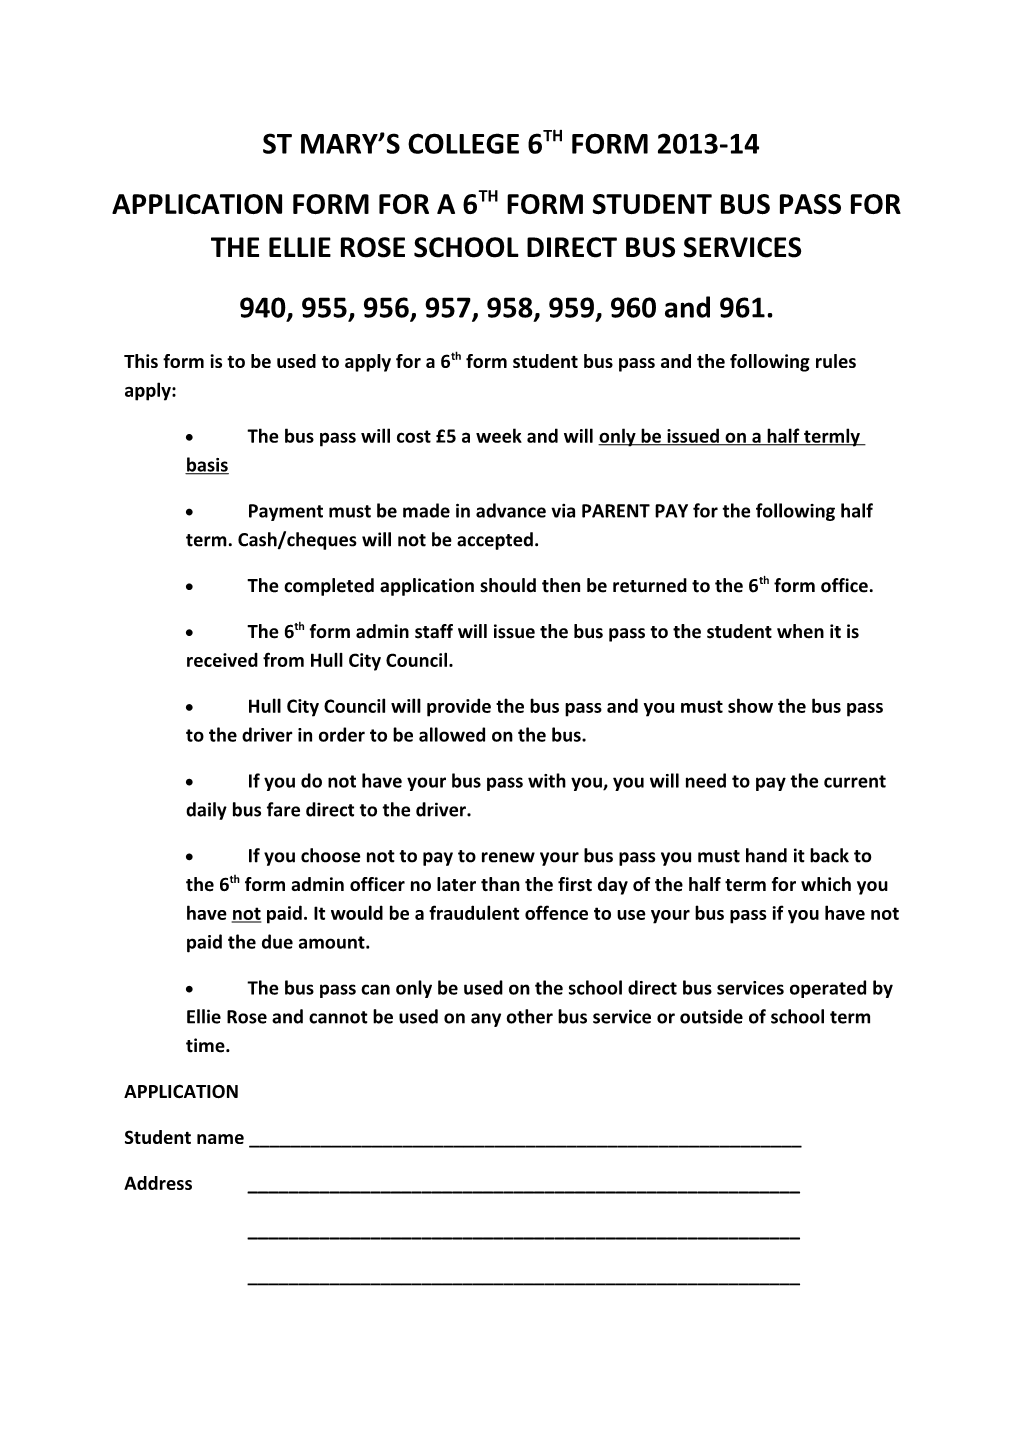 Application Form for a 6Th Form Student Bus Pass for the Ellie Rose School Direct Bus Services